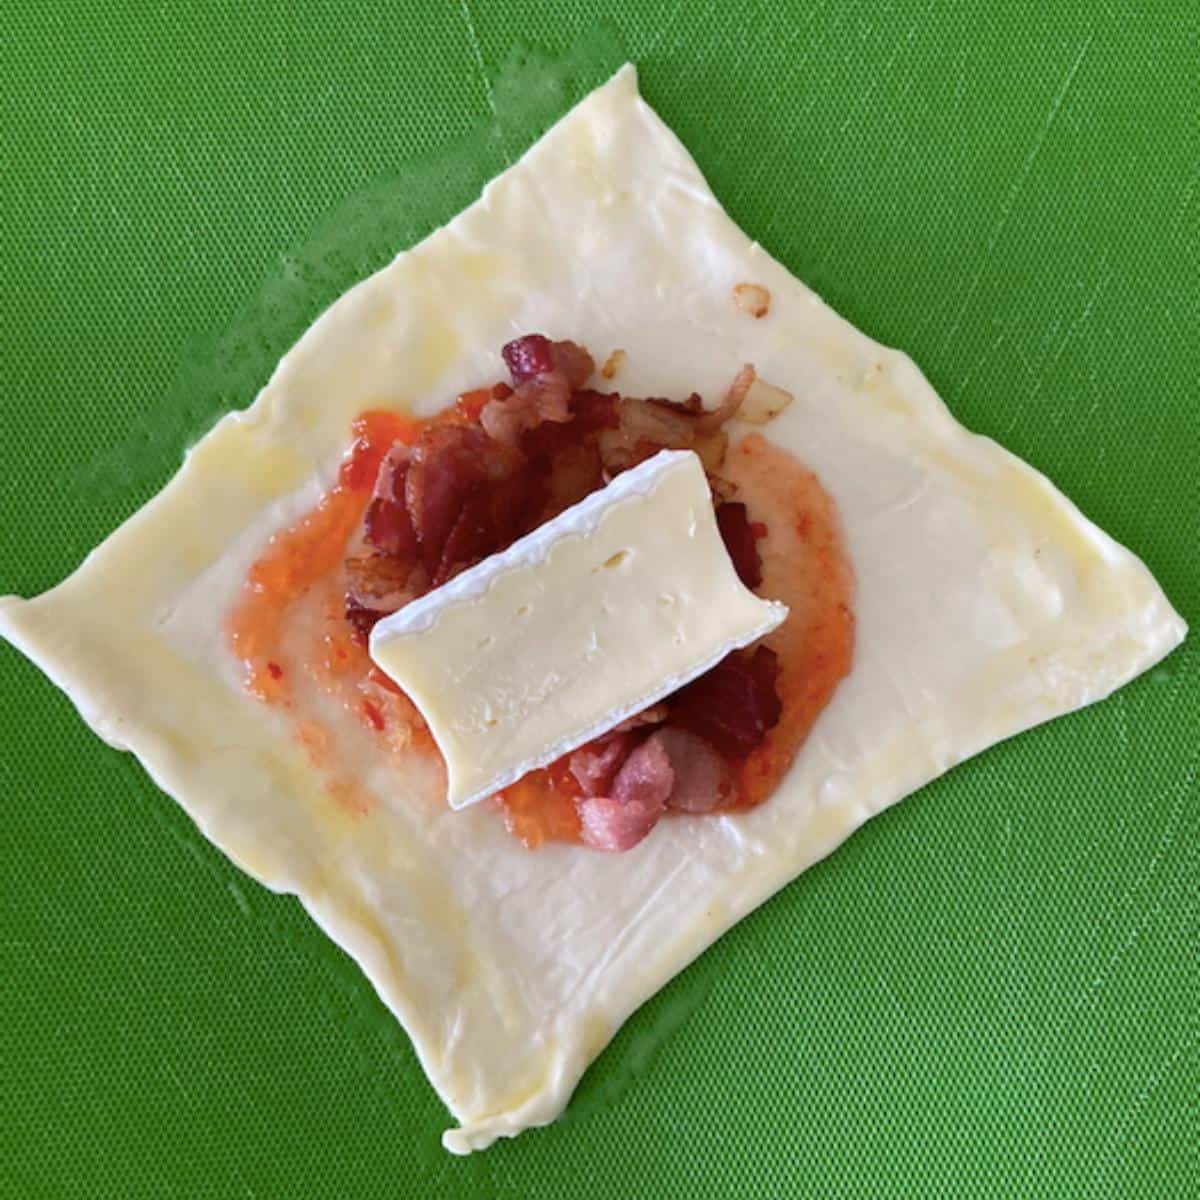 puff pastry square filled with pepper jelly, bacon, onion, and brie